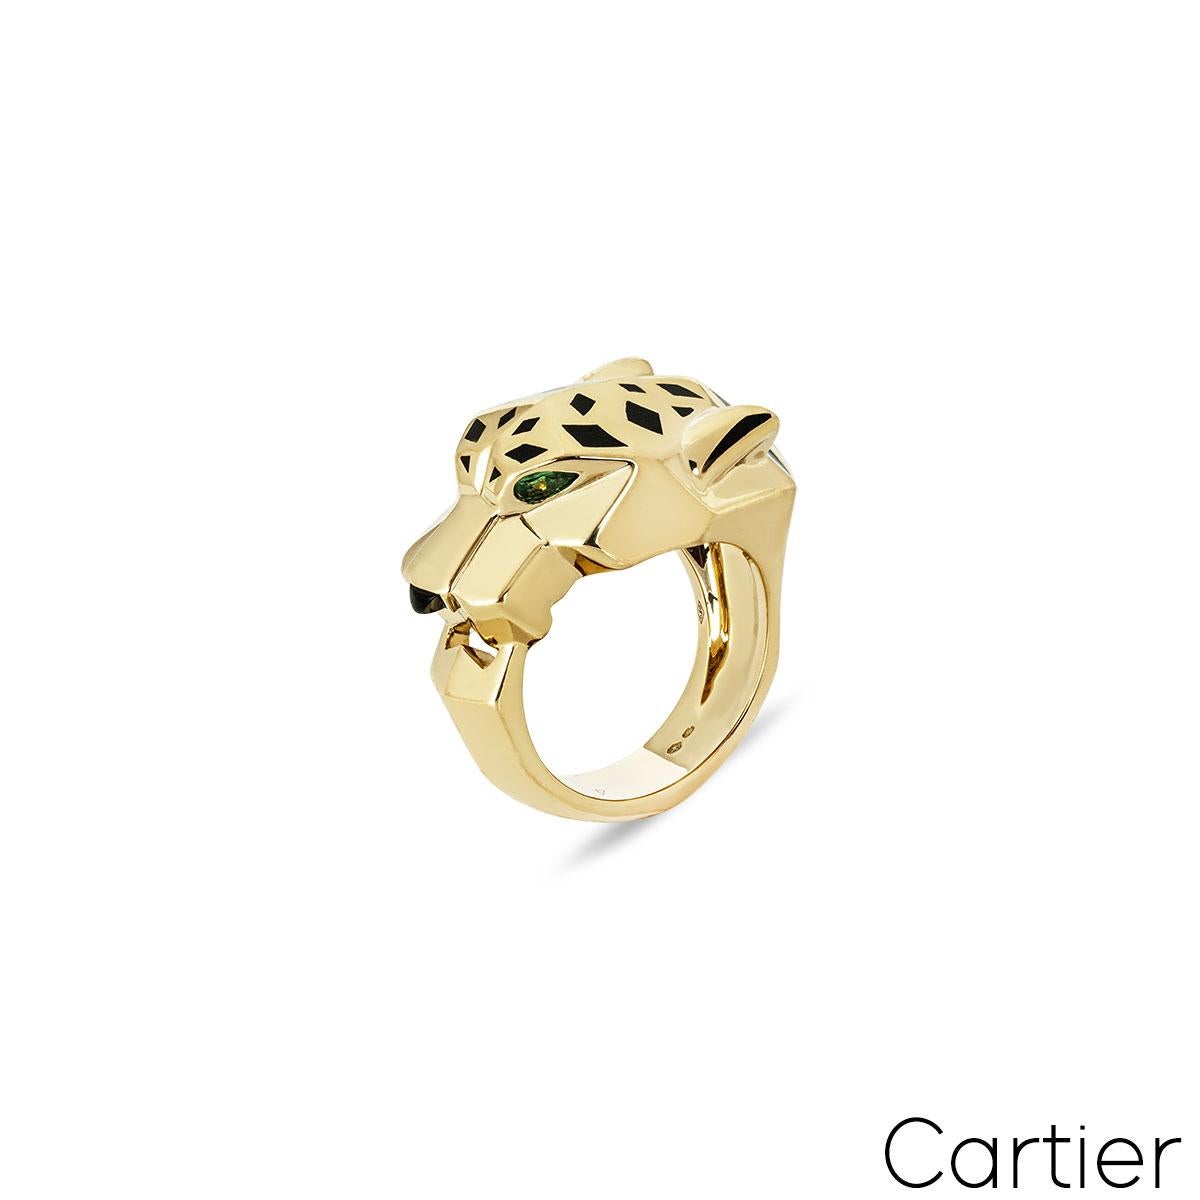 A beautiful 18k yellow gold ring by Cartier from the Panthere De Cartier collection. The ring is composed of a panthere head motif set with bold lacquer spots and is complemented with two tsavorite garnets set as the eyes with an onyx nose. The ring